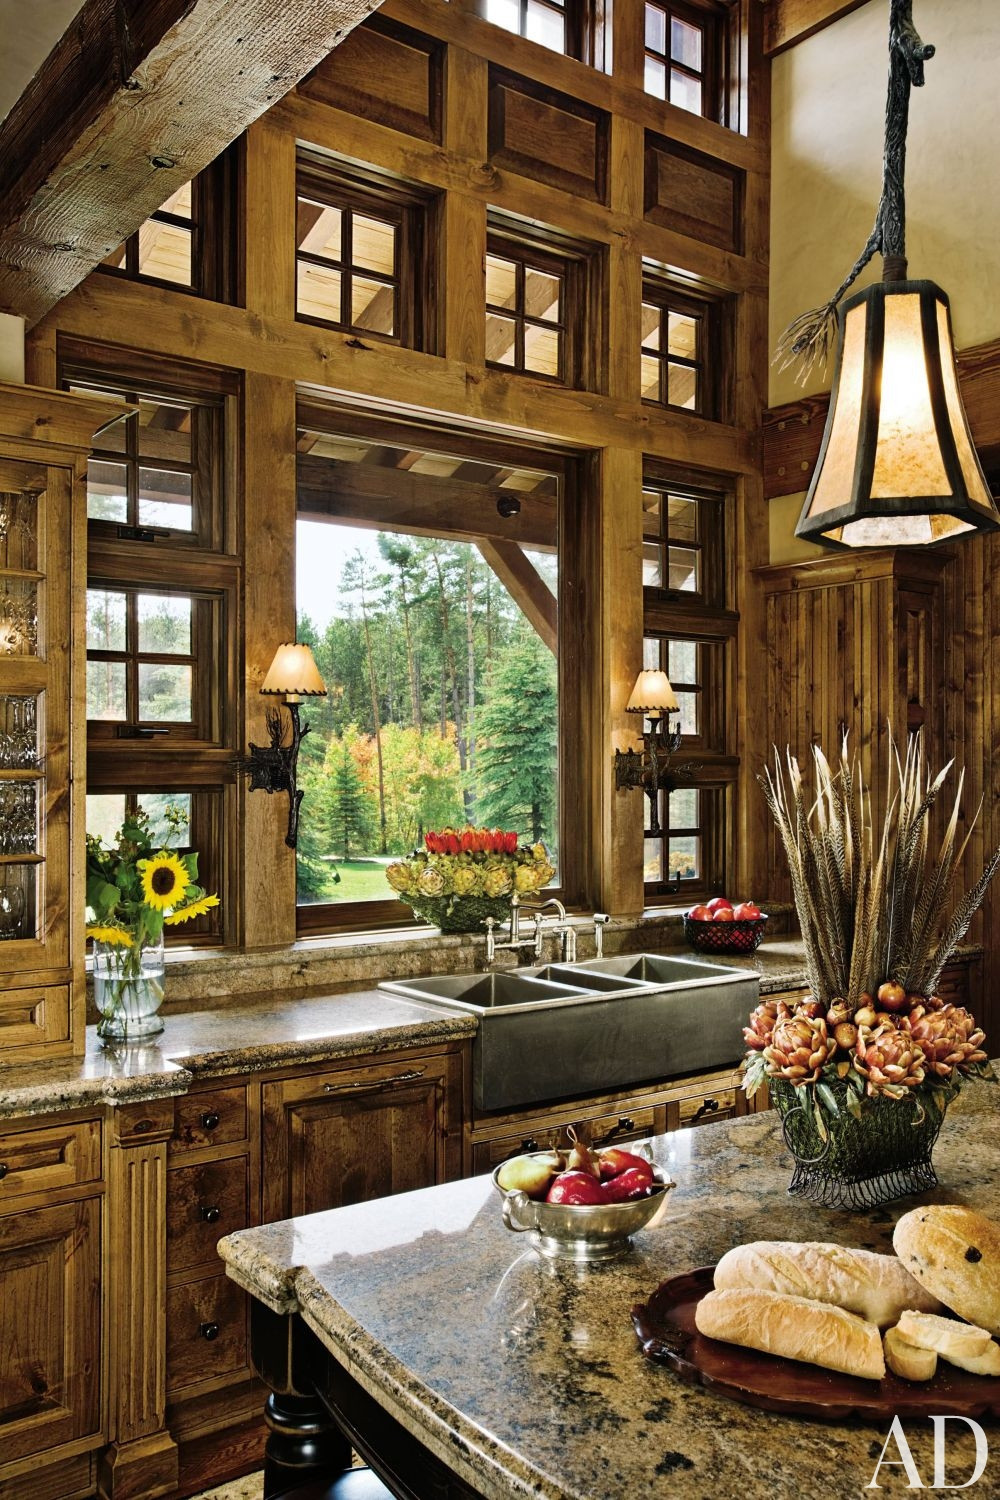 Rustic Kitchen Pictures
 How to Introduce Rustic Style to Your Home